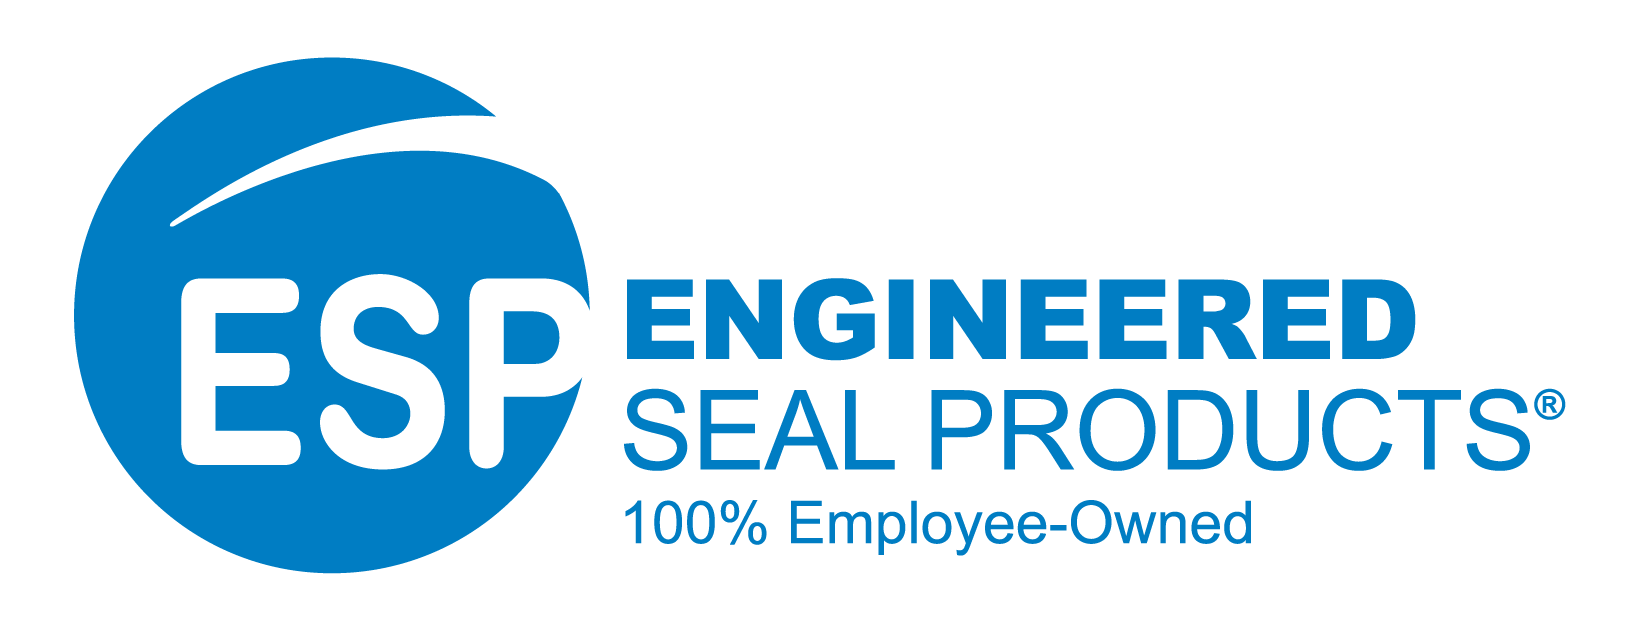 Engineered Seal Products